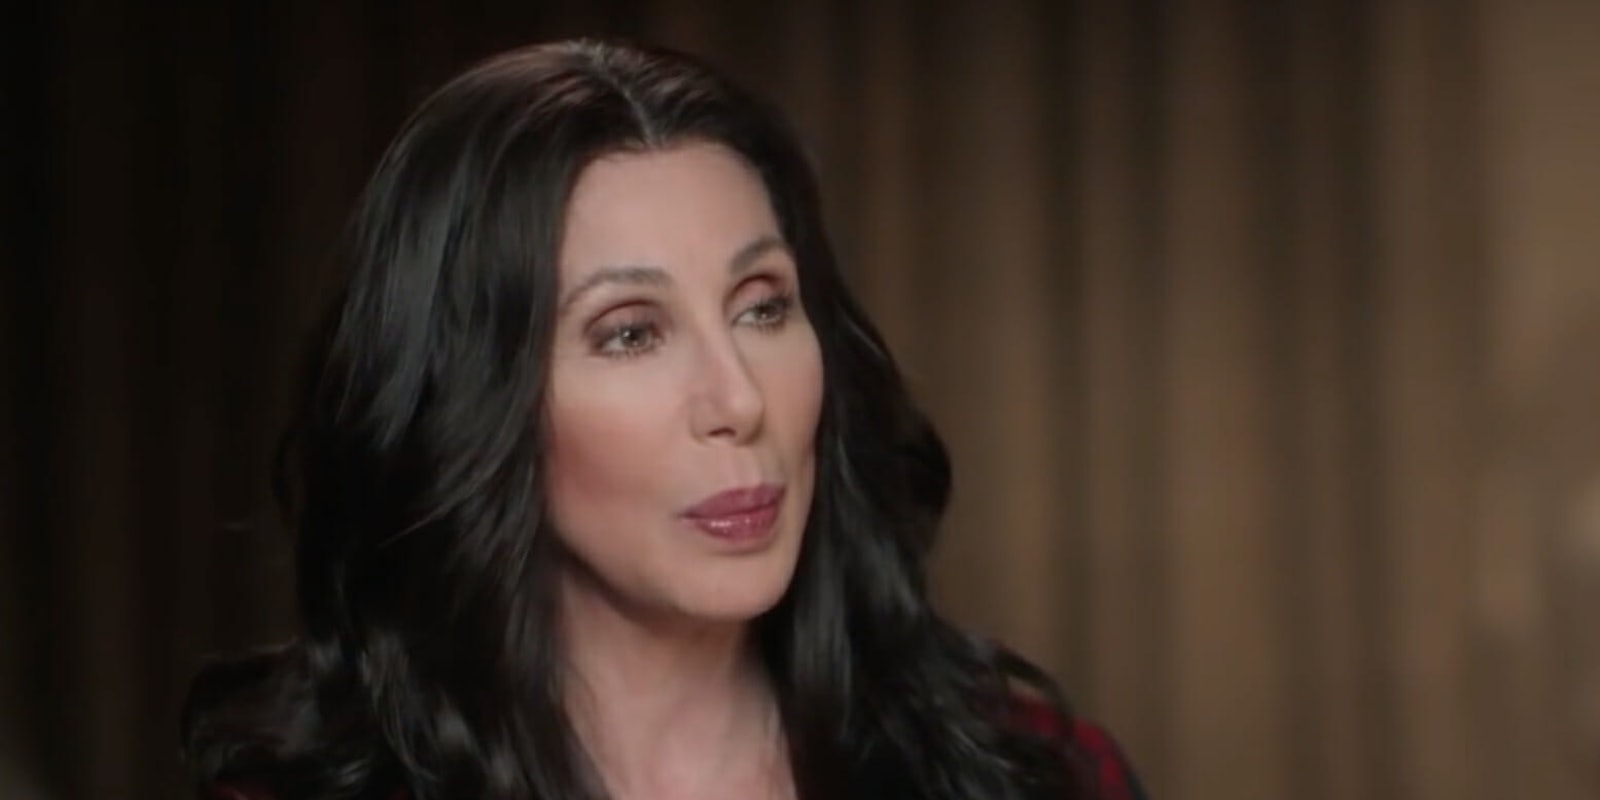 Cher tweeted opposition to changes in net neutrality rules.